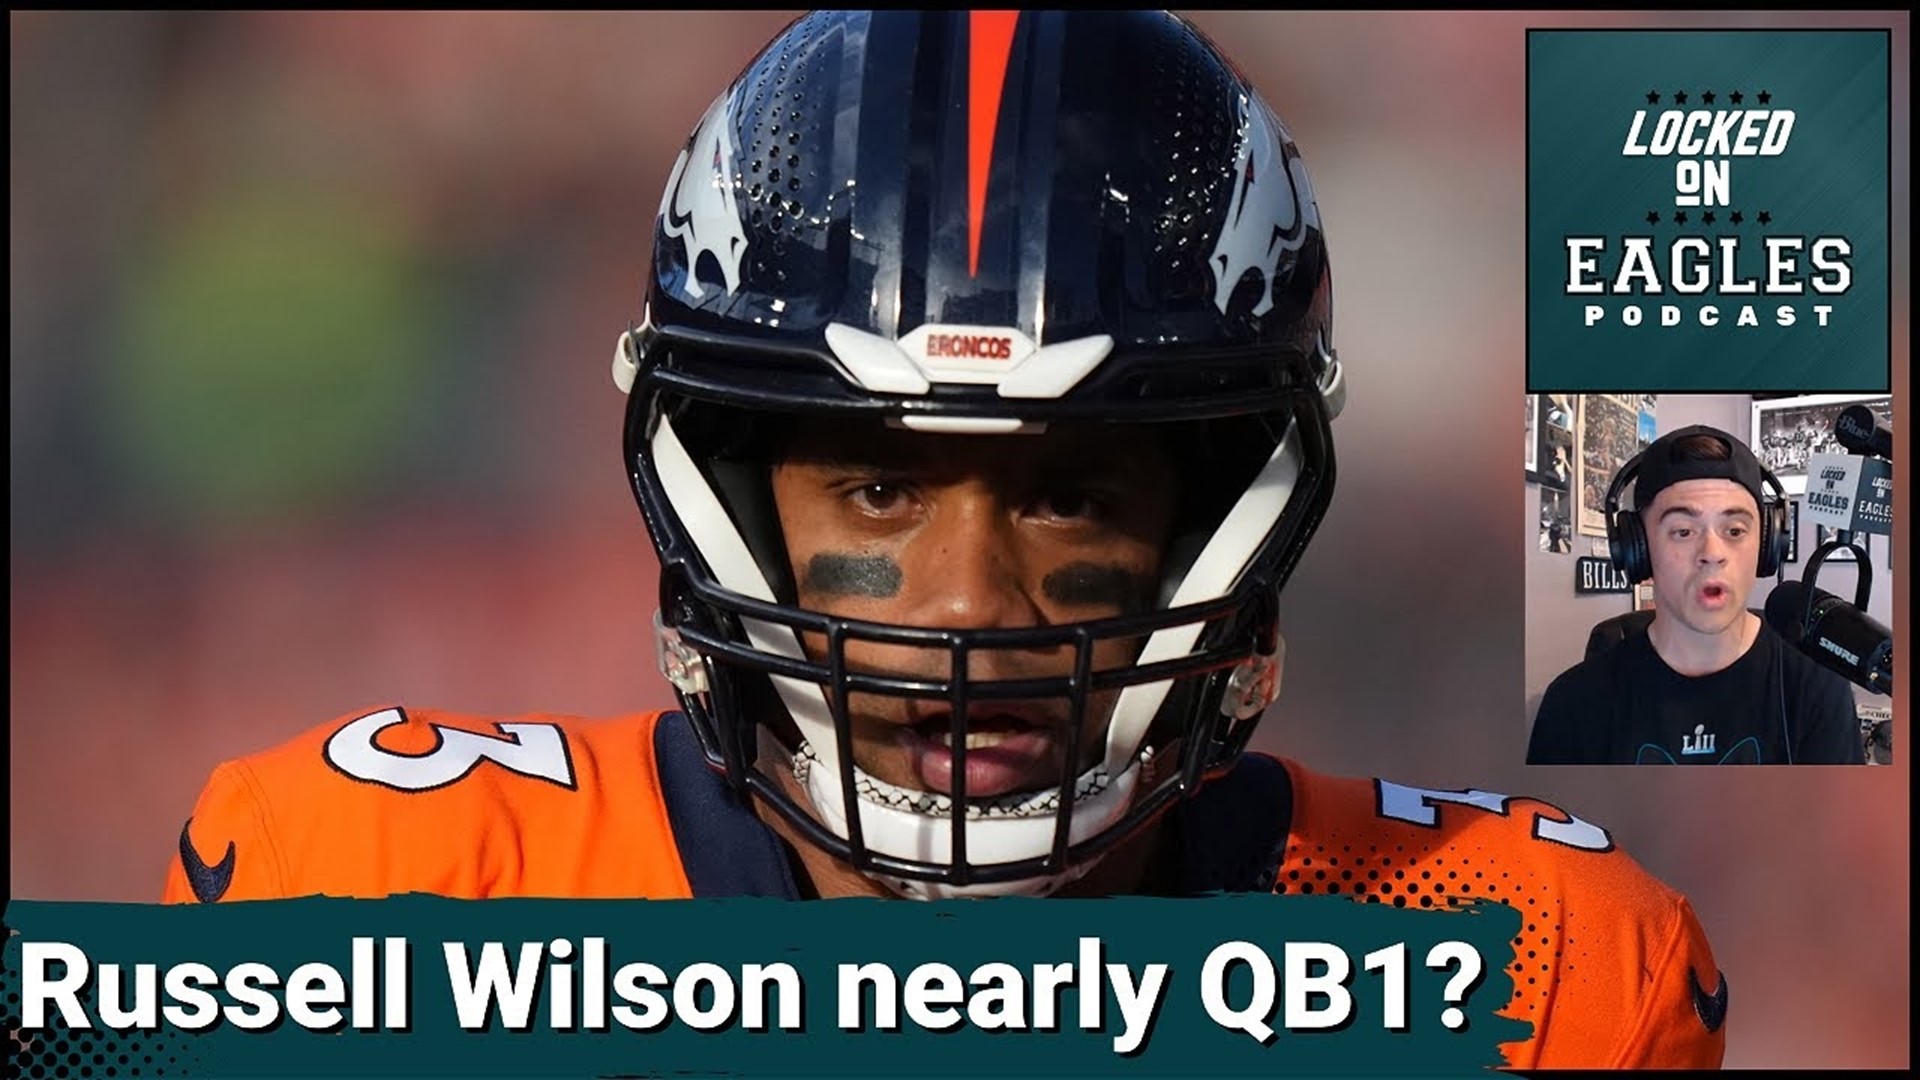 The Philadelphia Eagles nearly had a trade done with the Seattle Seahawks for Russell Wilson in the 2022 offseason before Wilson blocked the trade!